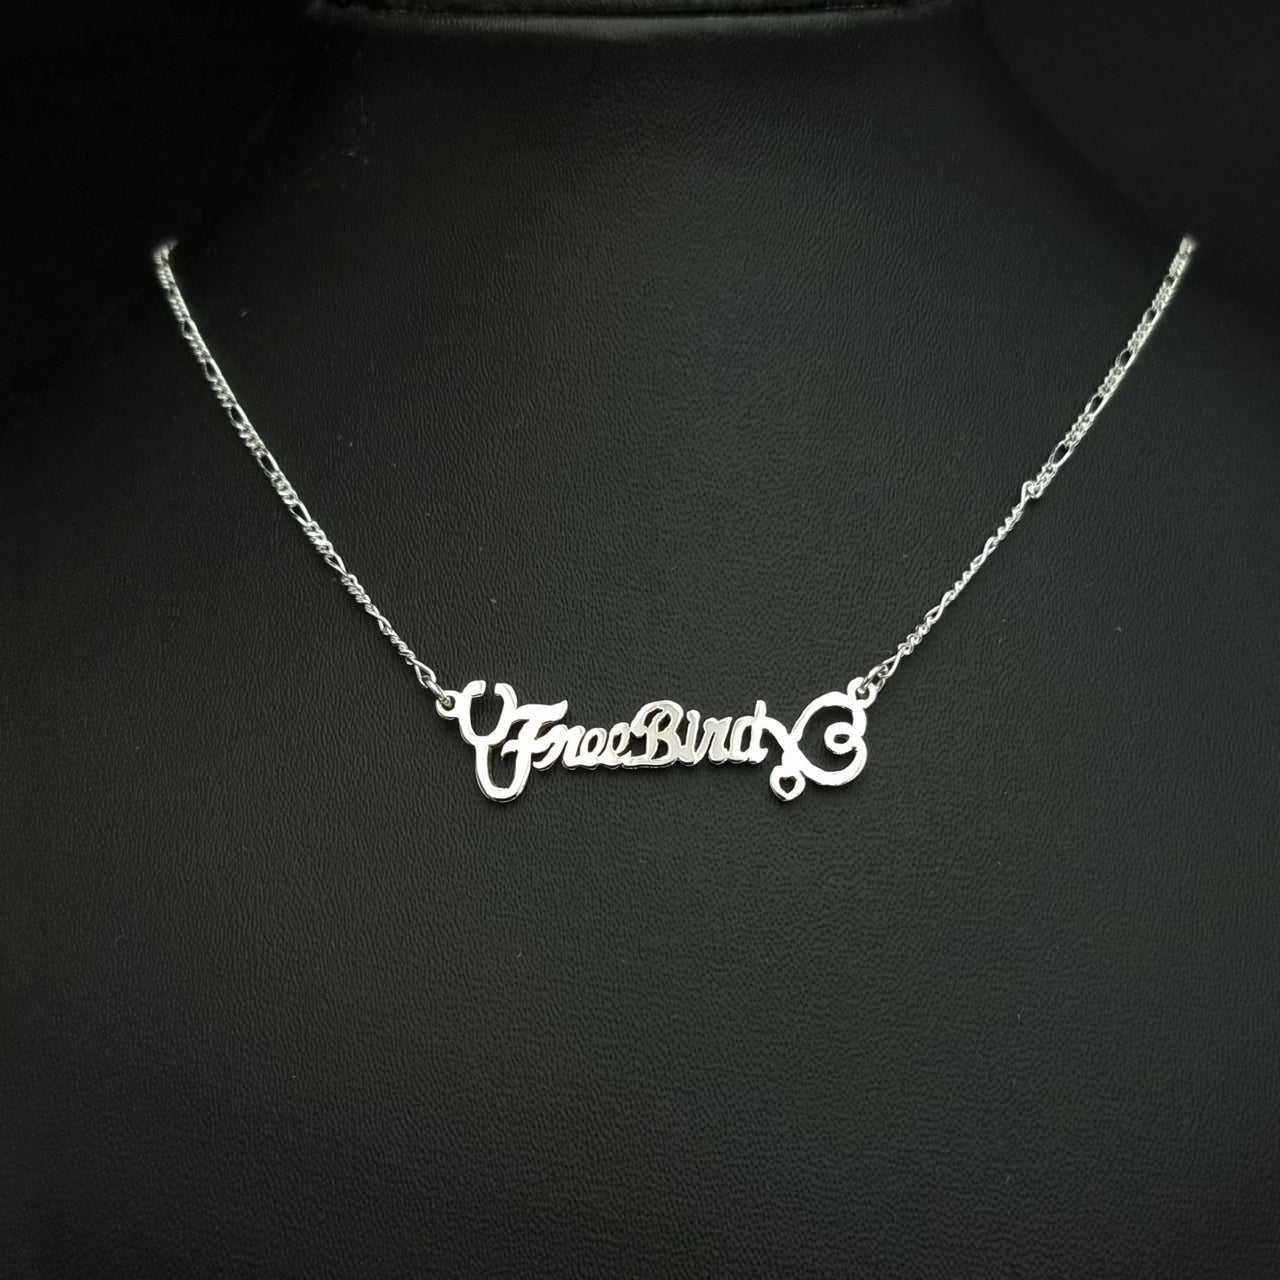 Personalized name necklace for medical staff